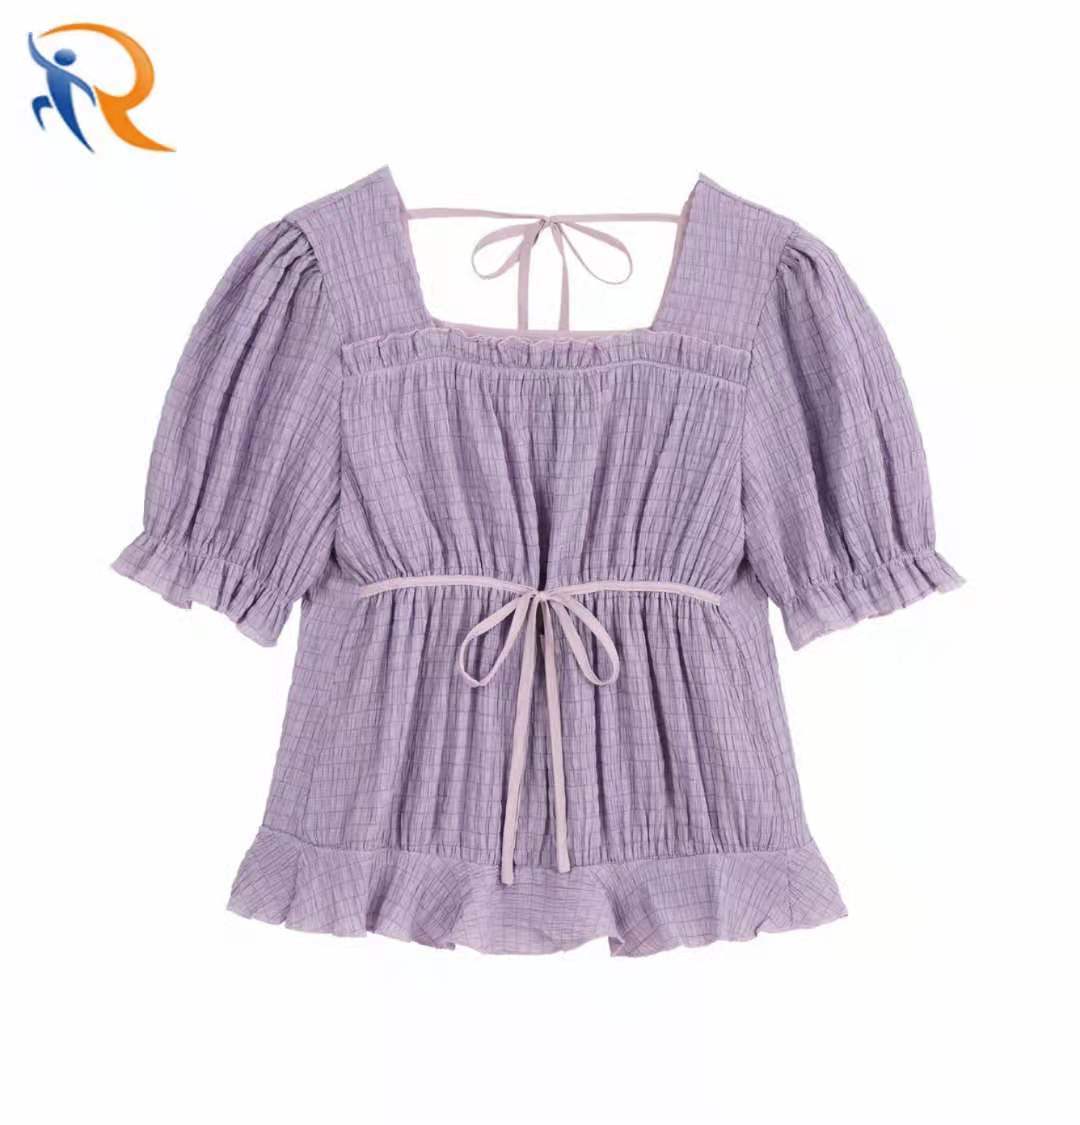 Tops For Girls Women Clothing 2021 Amazon Top Seller Chiffon Sweet Square Collar Short Sleeve Ladies' Blouses